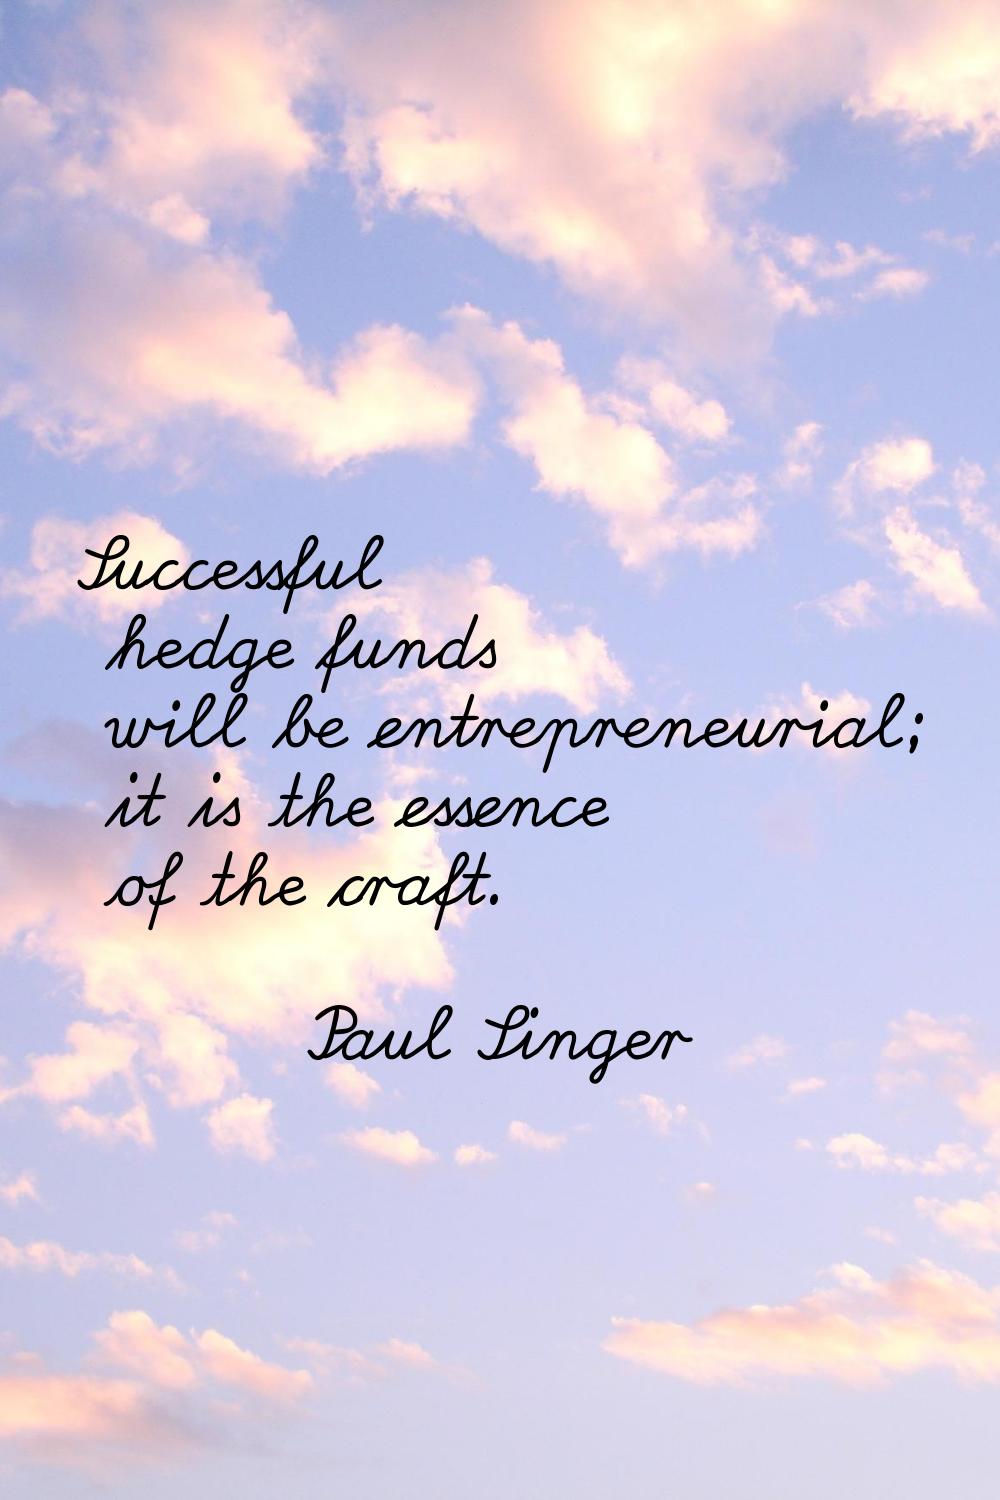 Successful hedge funds will be entrepreneurial; it is the essence of the craft.